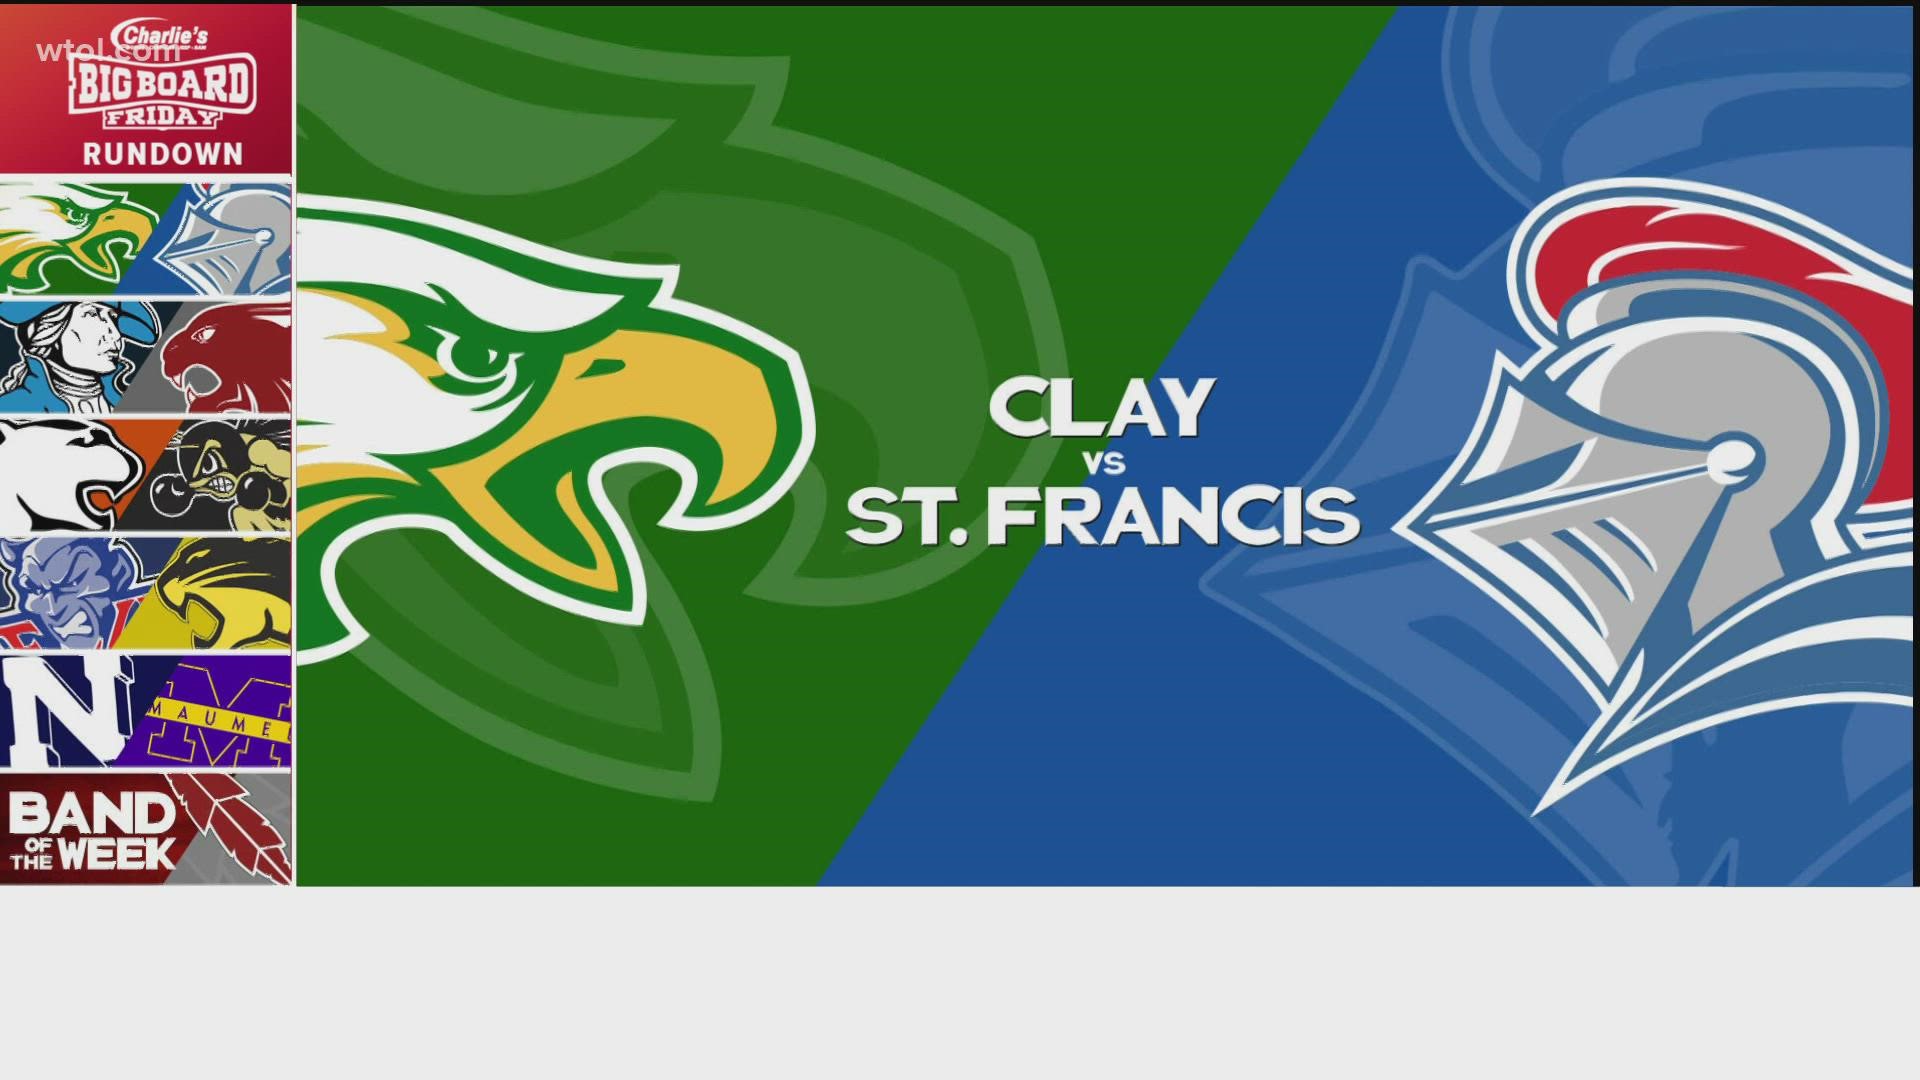 Clay now on a four-game losing streak after a loss to St. Francis.